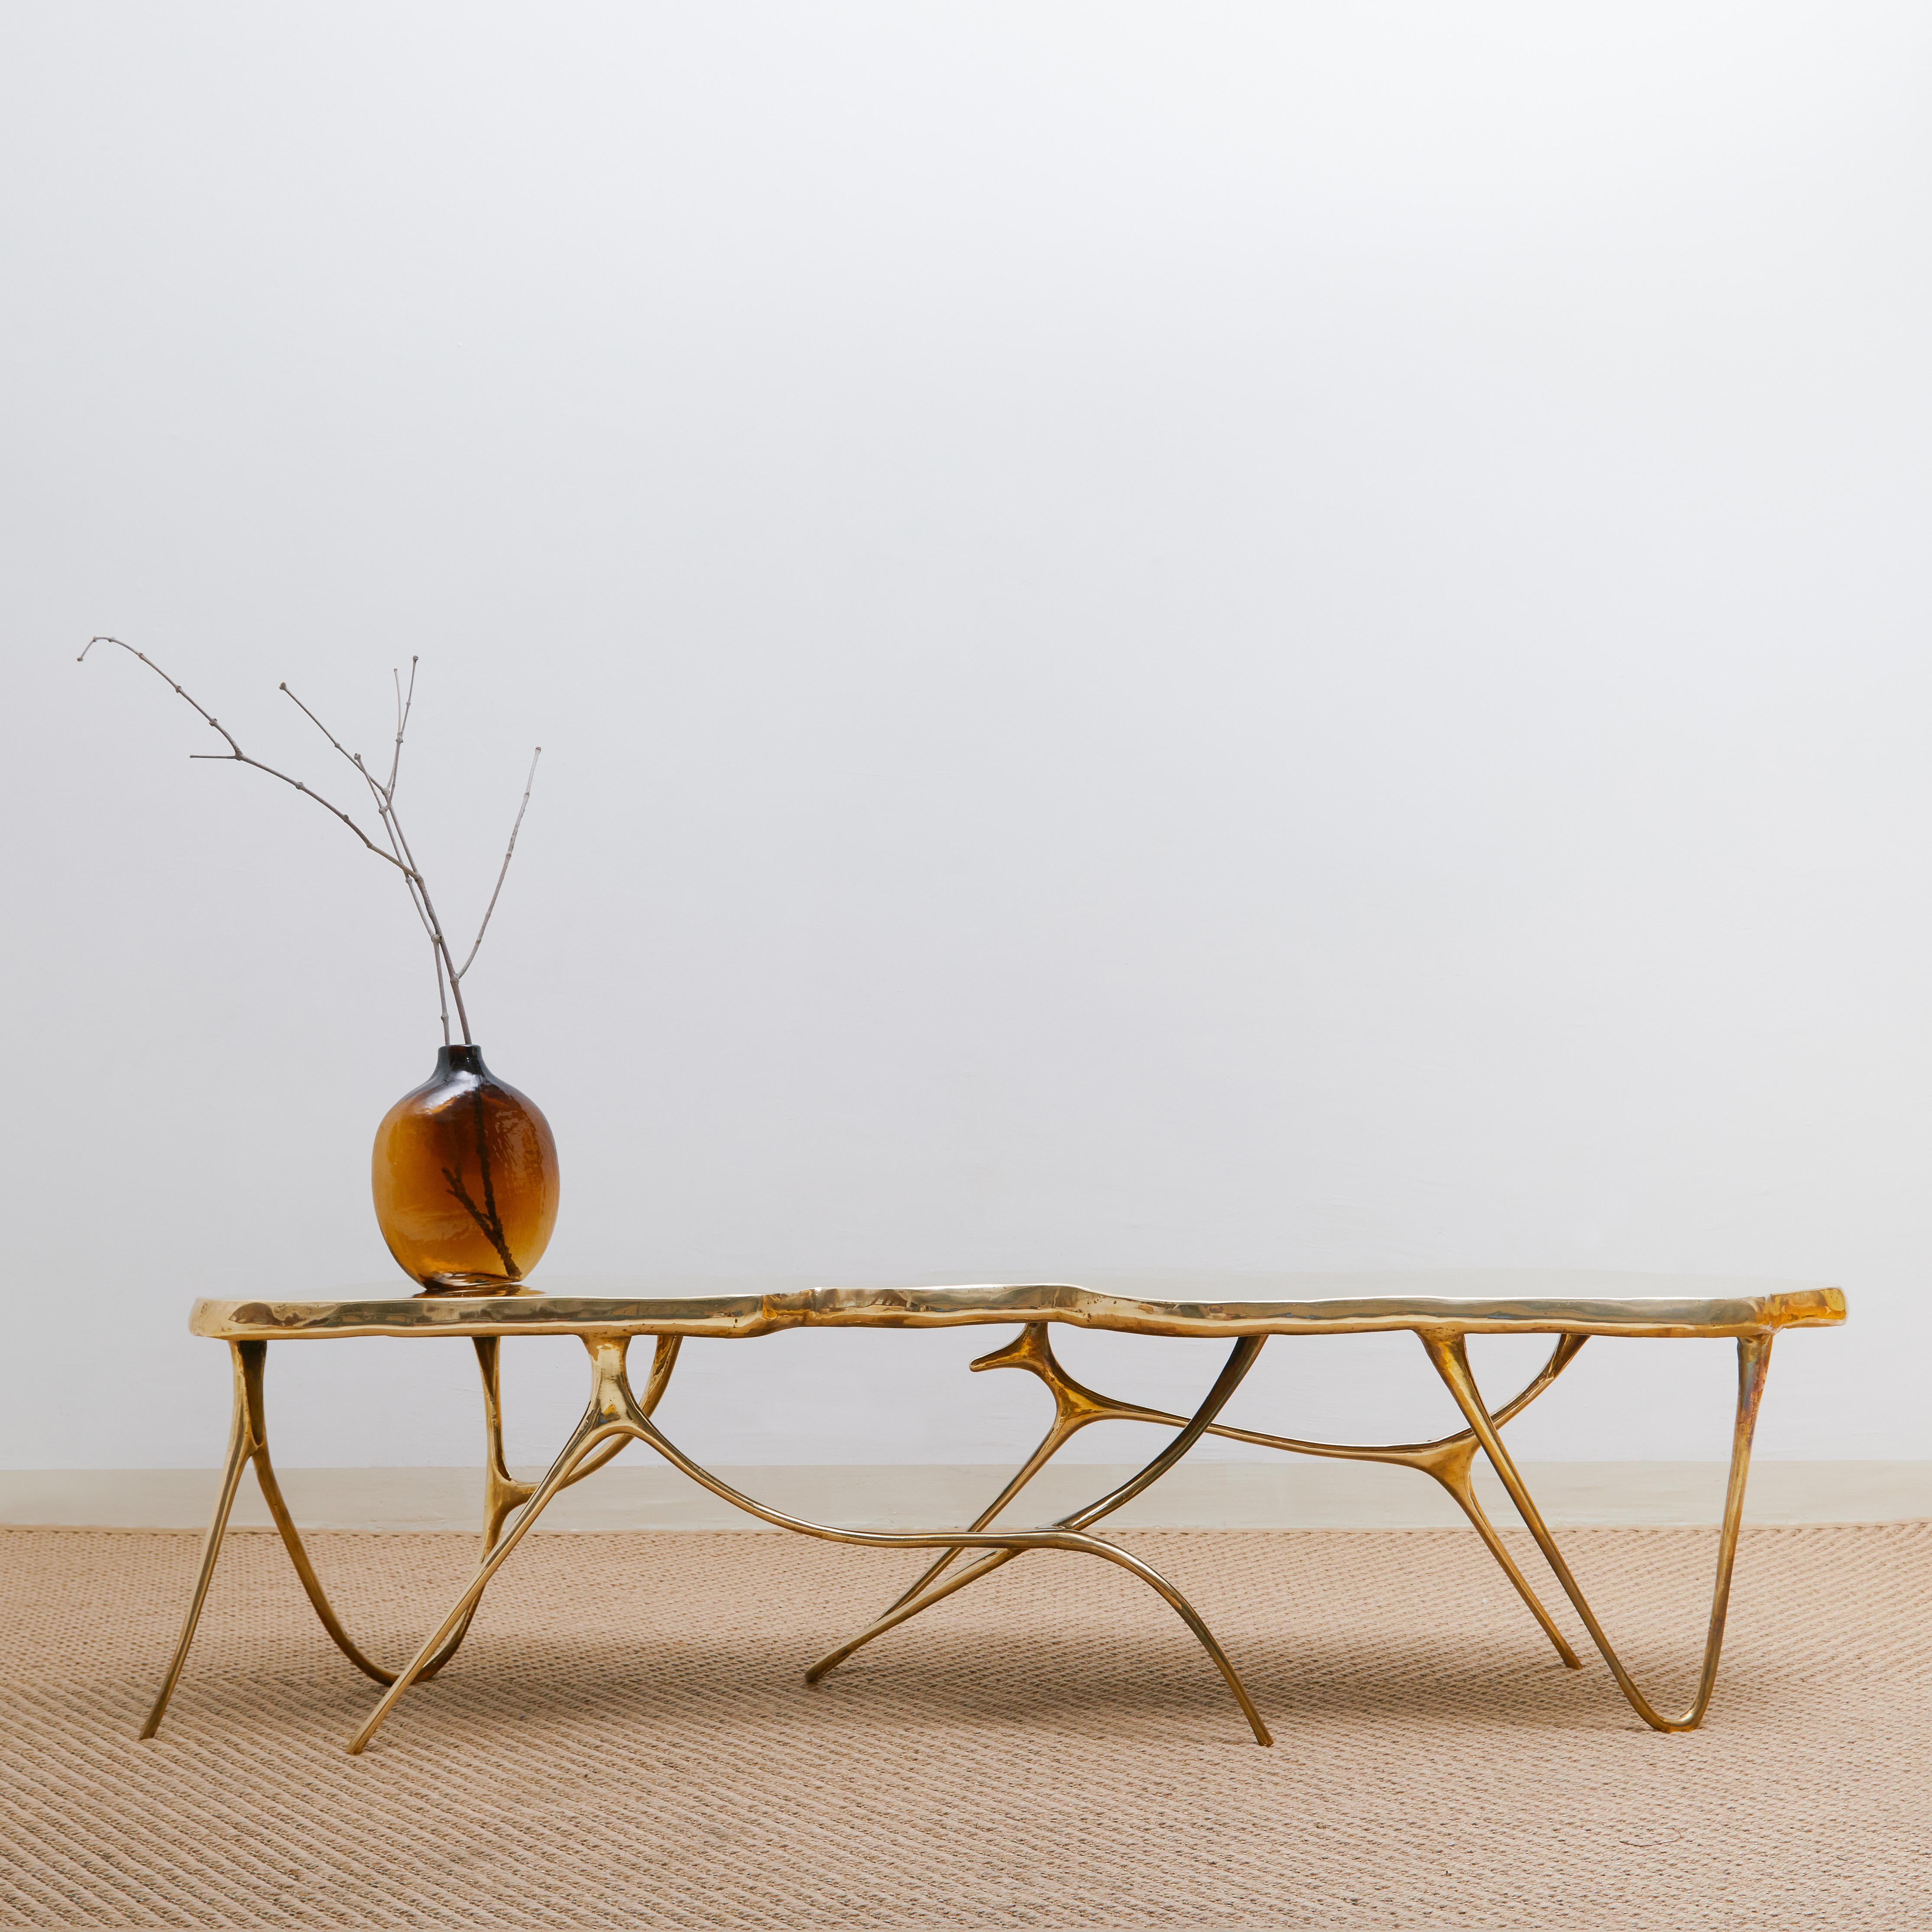 Thai Calligraphic Sculpted Brass Bench by Misaya For Sale